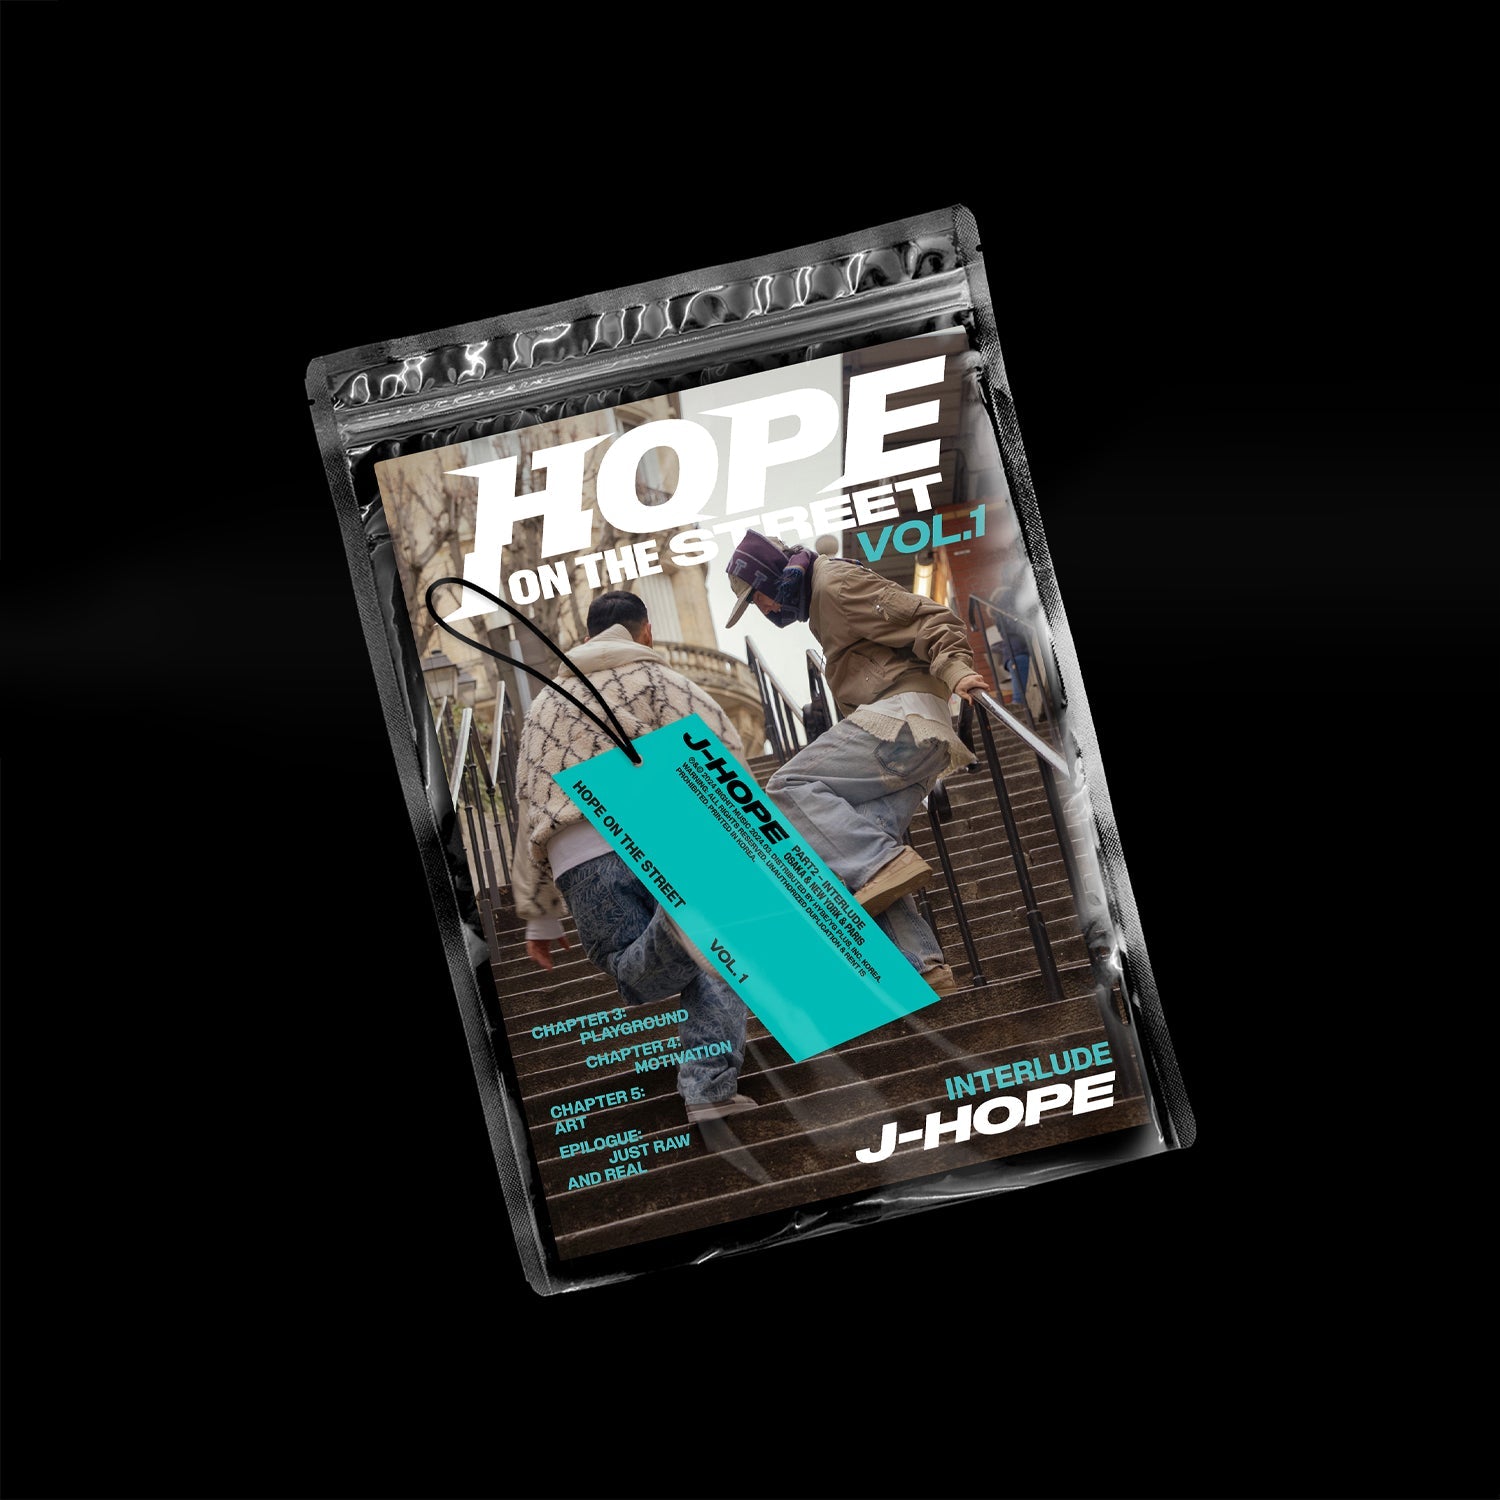 J-HOPE SPECIAL ALBUM 'HOPE ON THE STREET VOL. 1' INTERLUDE VERSION COVER